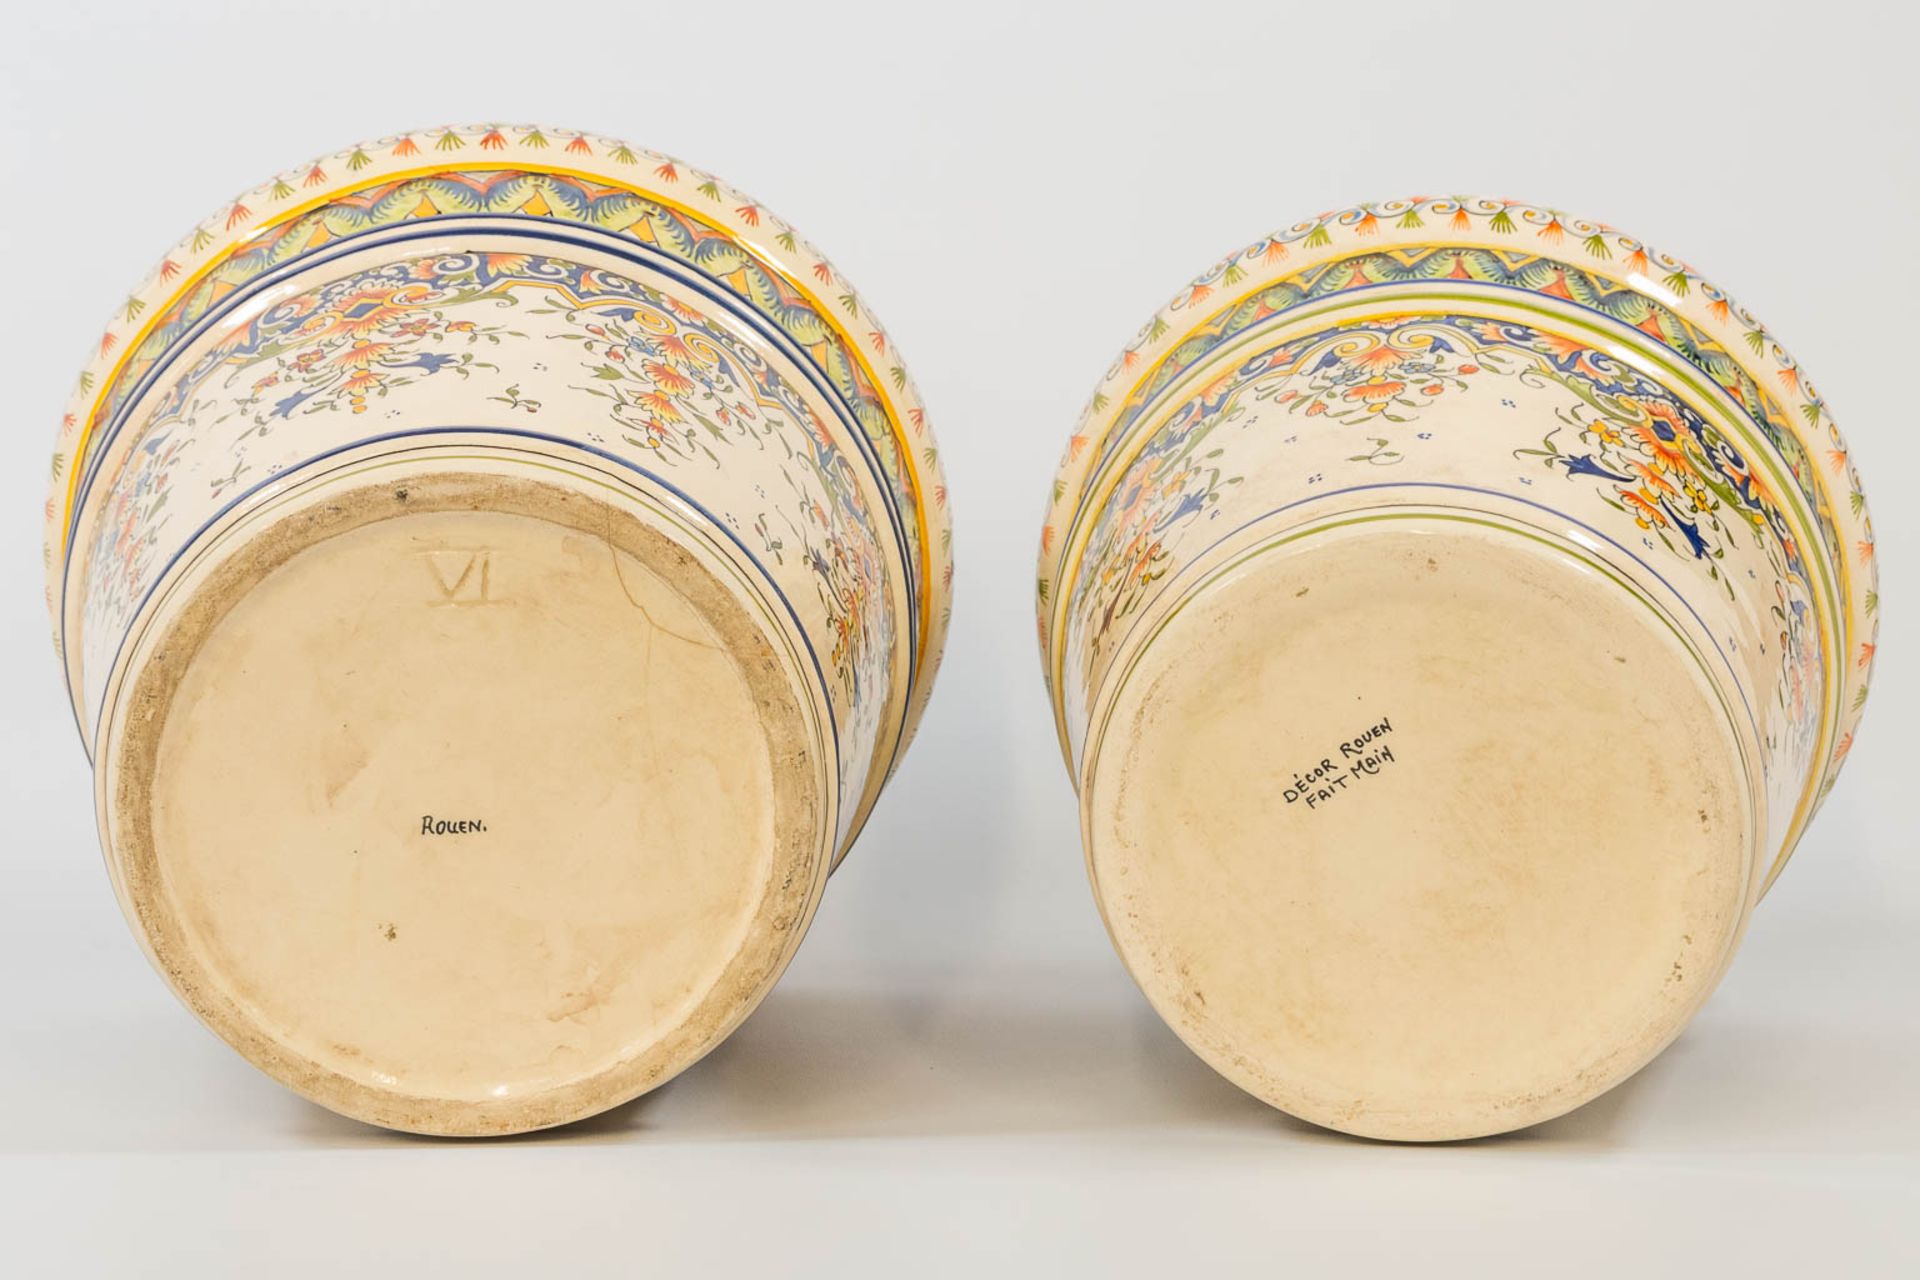 A collection of 2 cache-pots in two sizes with hand-painted decor, made of faience in Rouen, France. - Bild 7 aus 12